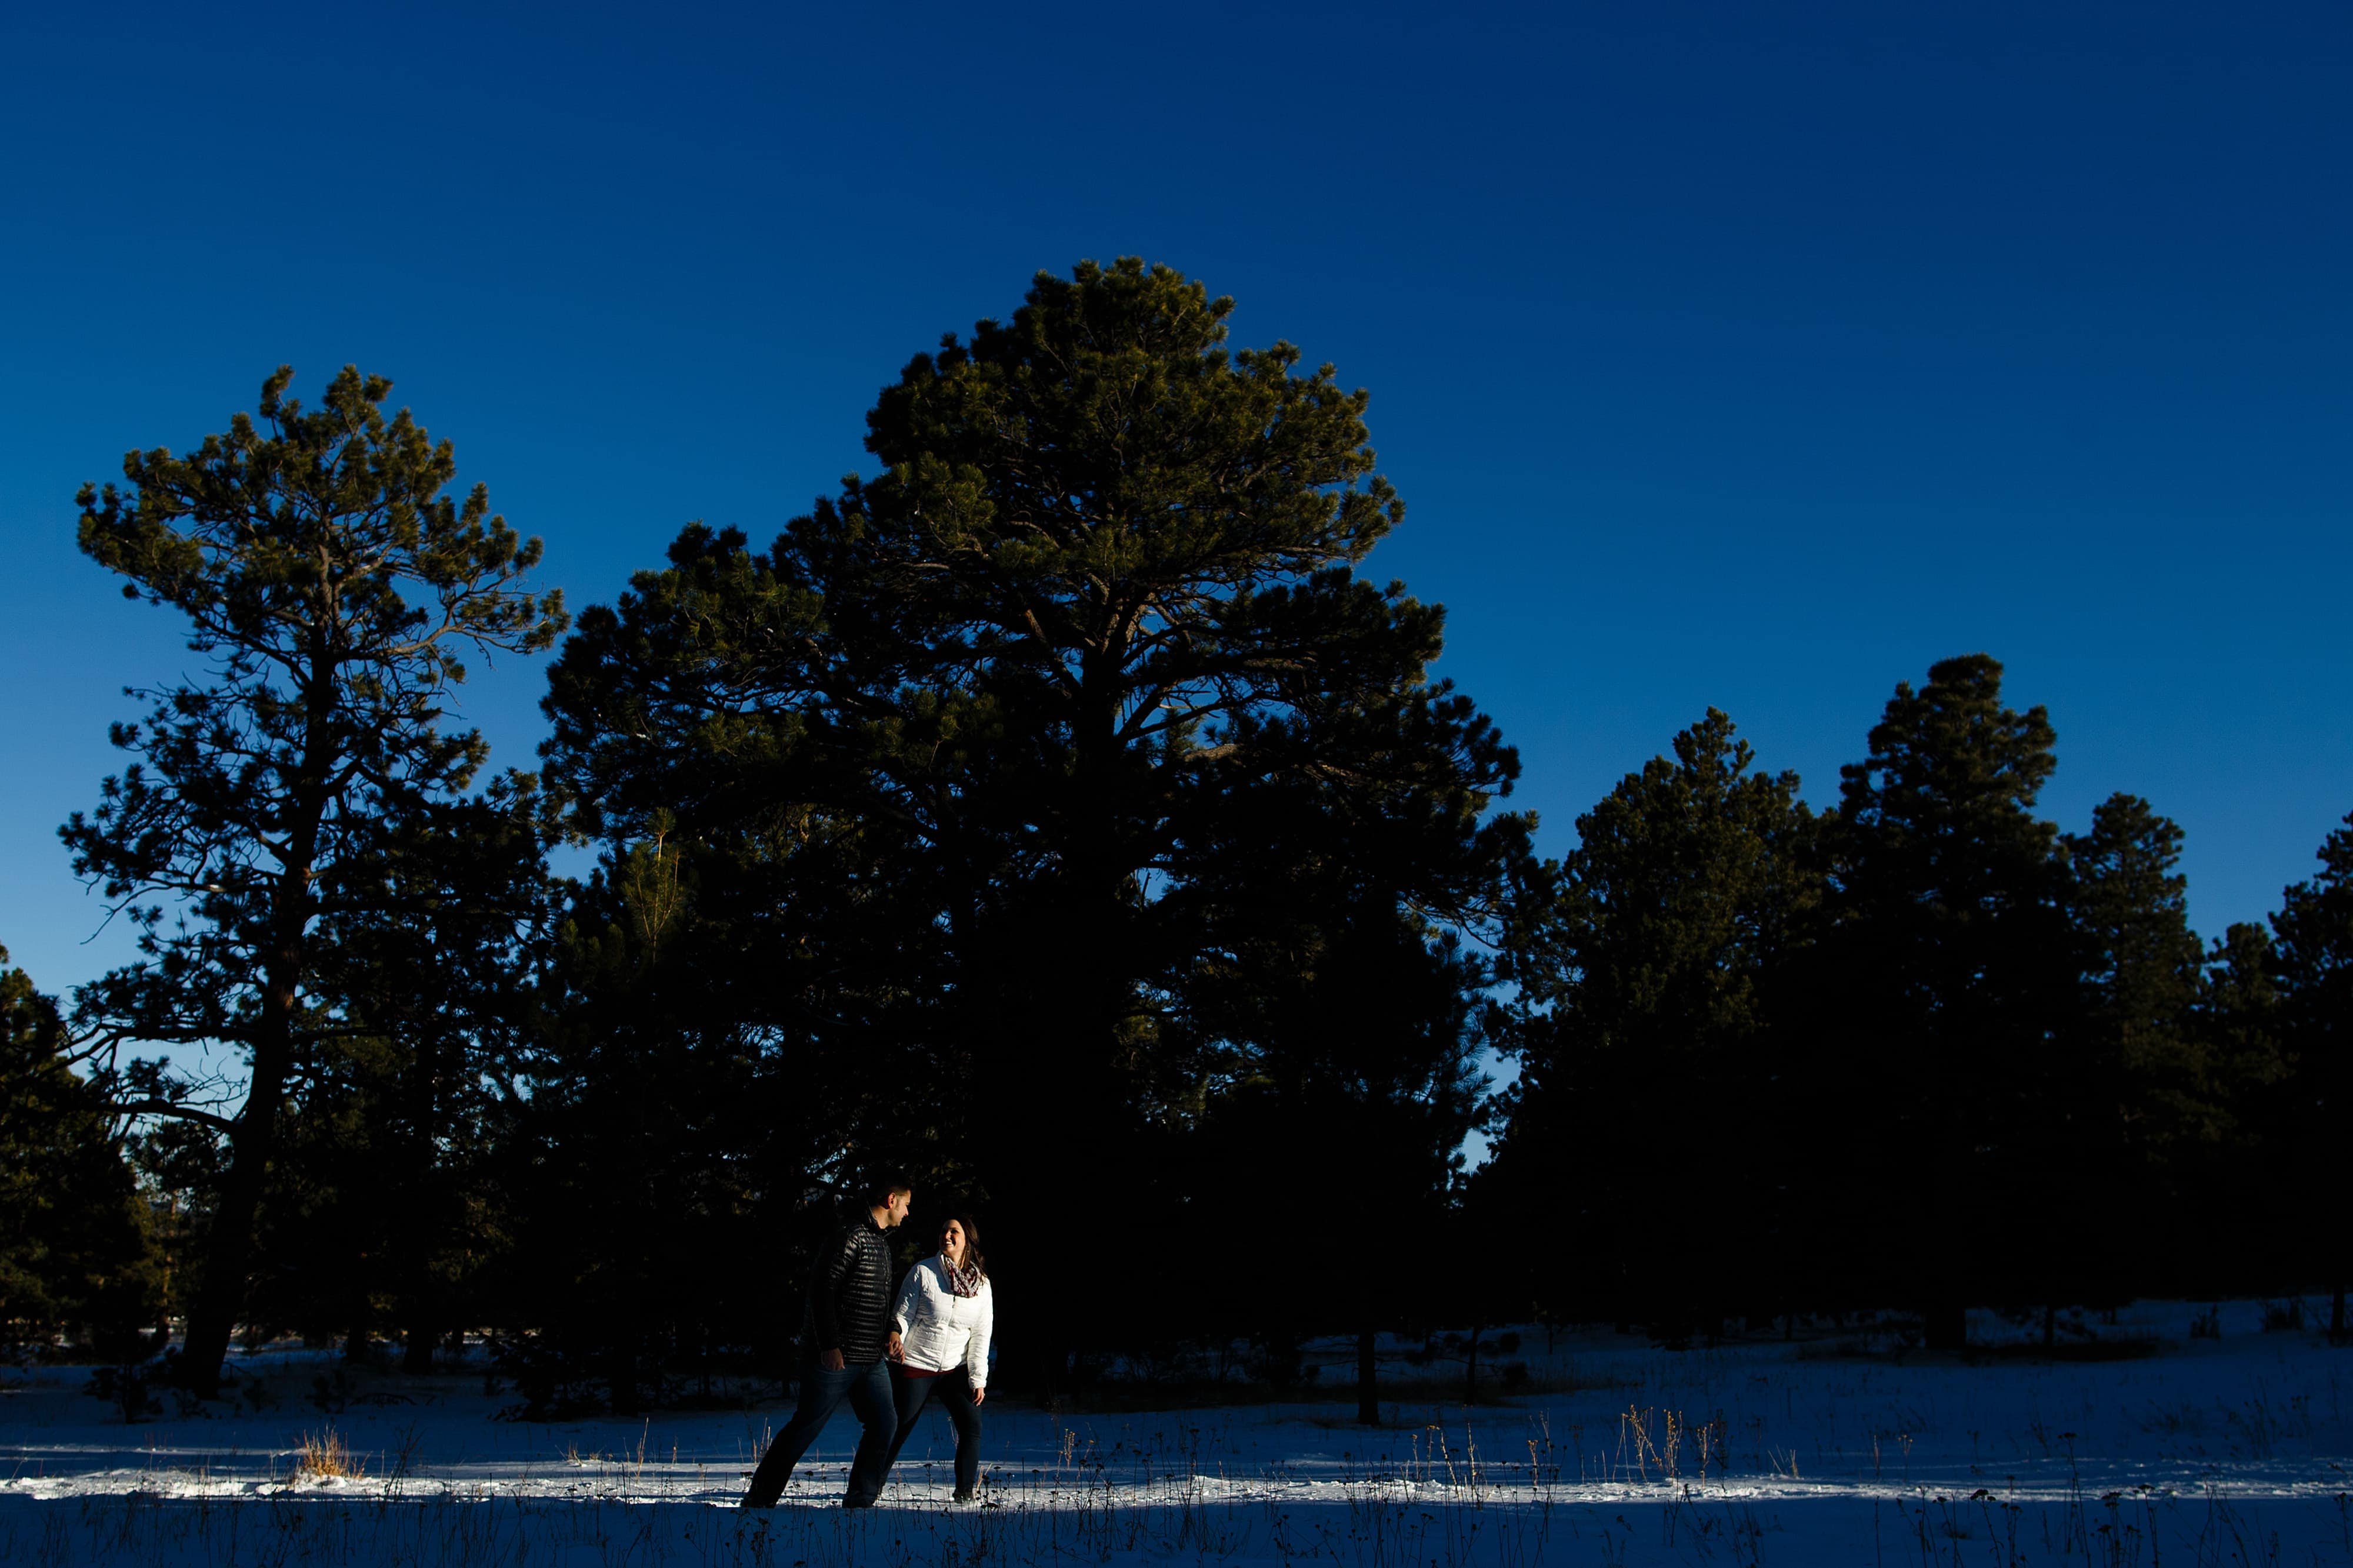 Melissa and Jordan walk together in the sunlight at Elk Meadow Park